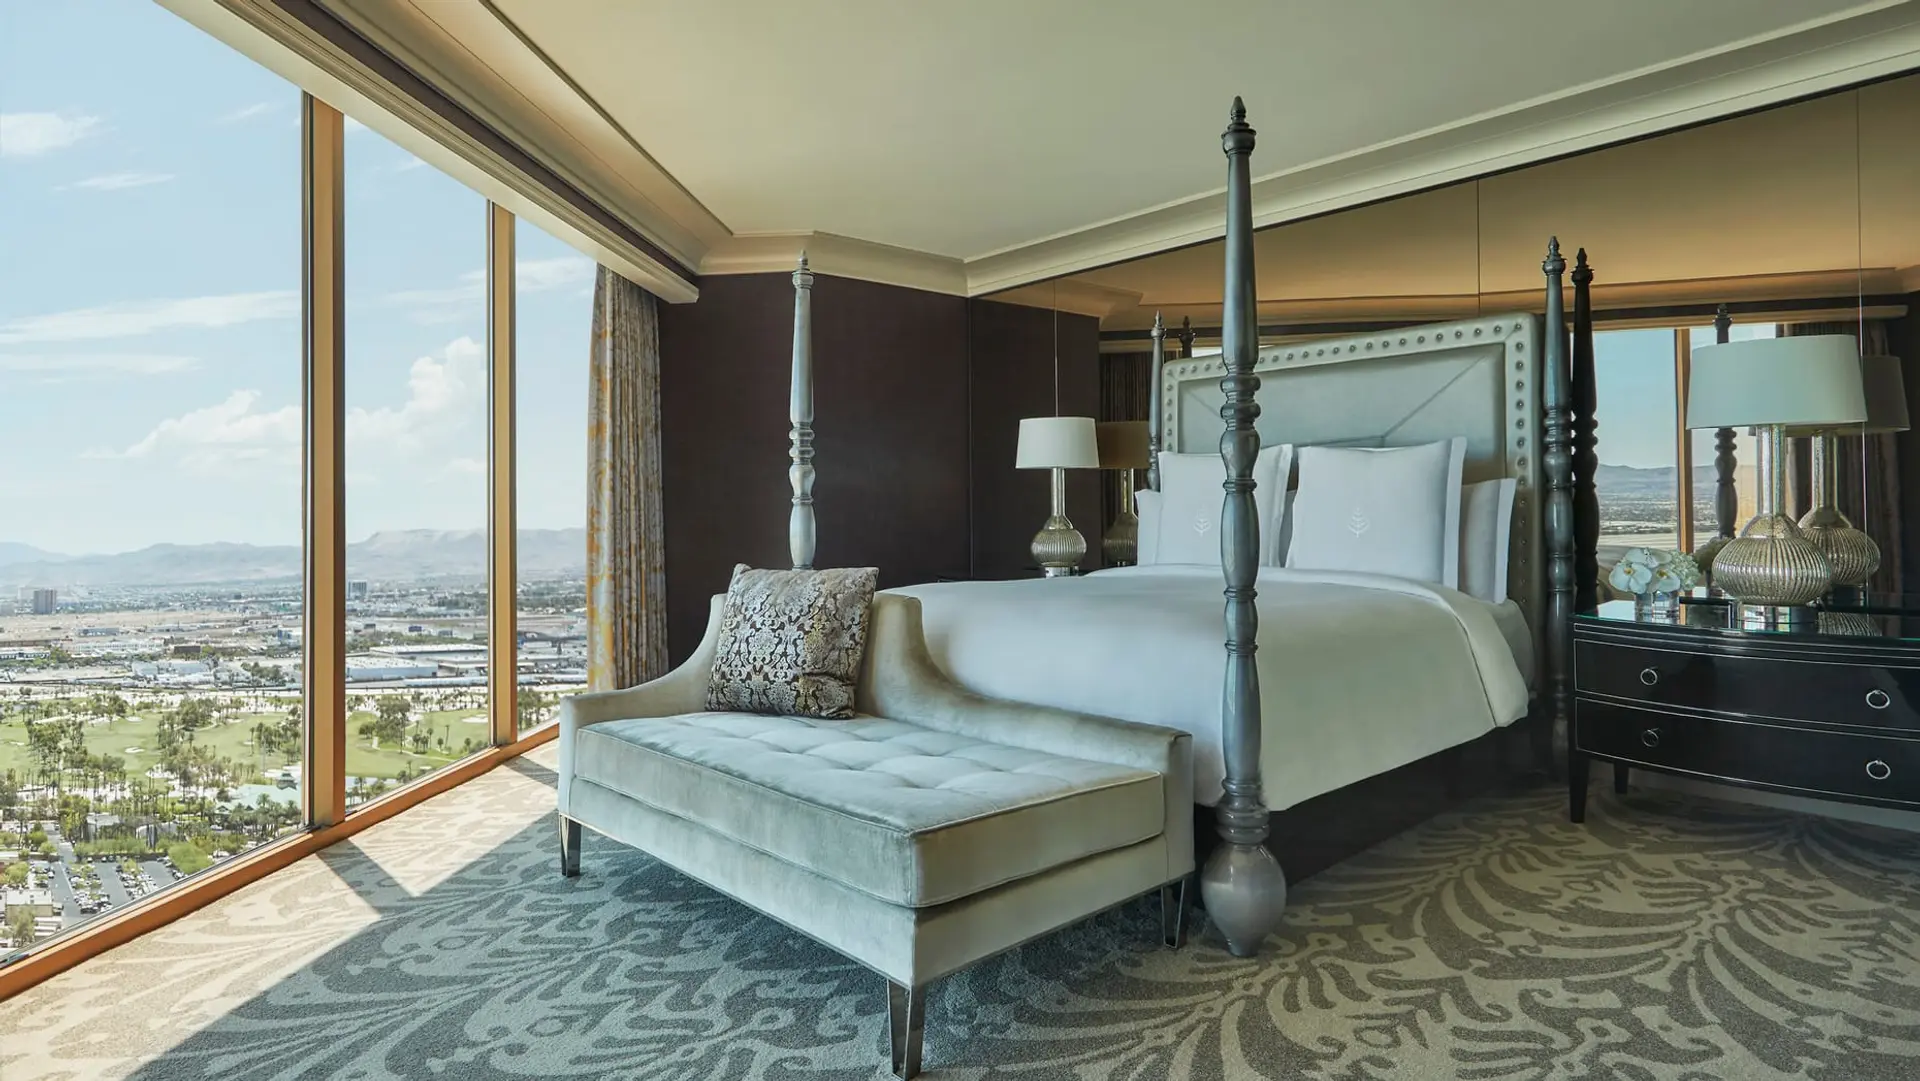 Large window view of Las Vegas, kingsize bed with grey and white decor, sofa in front of bed in grey, walls in a black-ish colour and white roof at The Four Seasons Las Vegas.